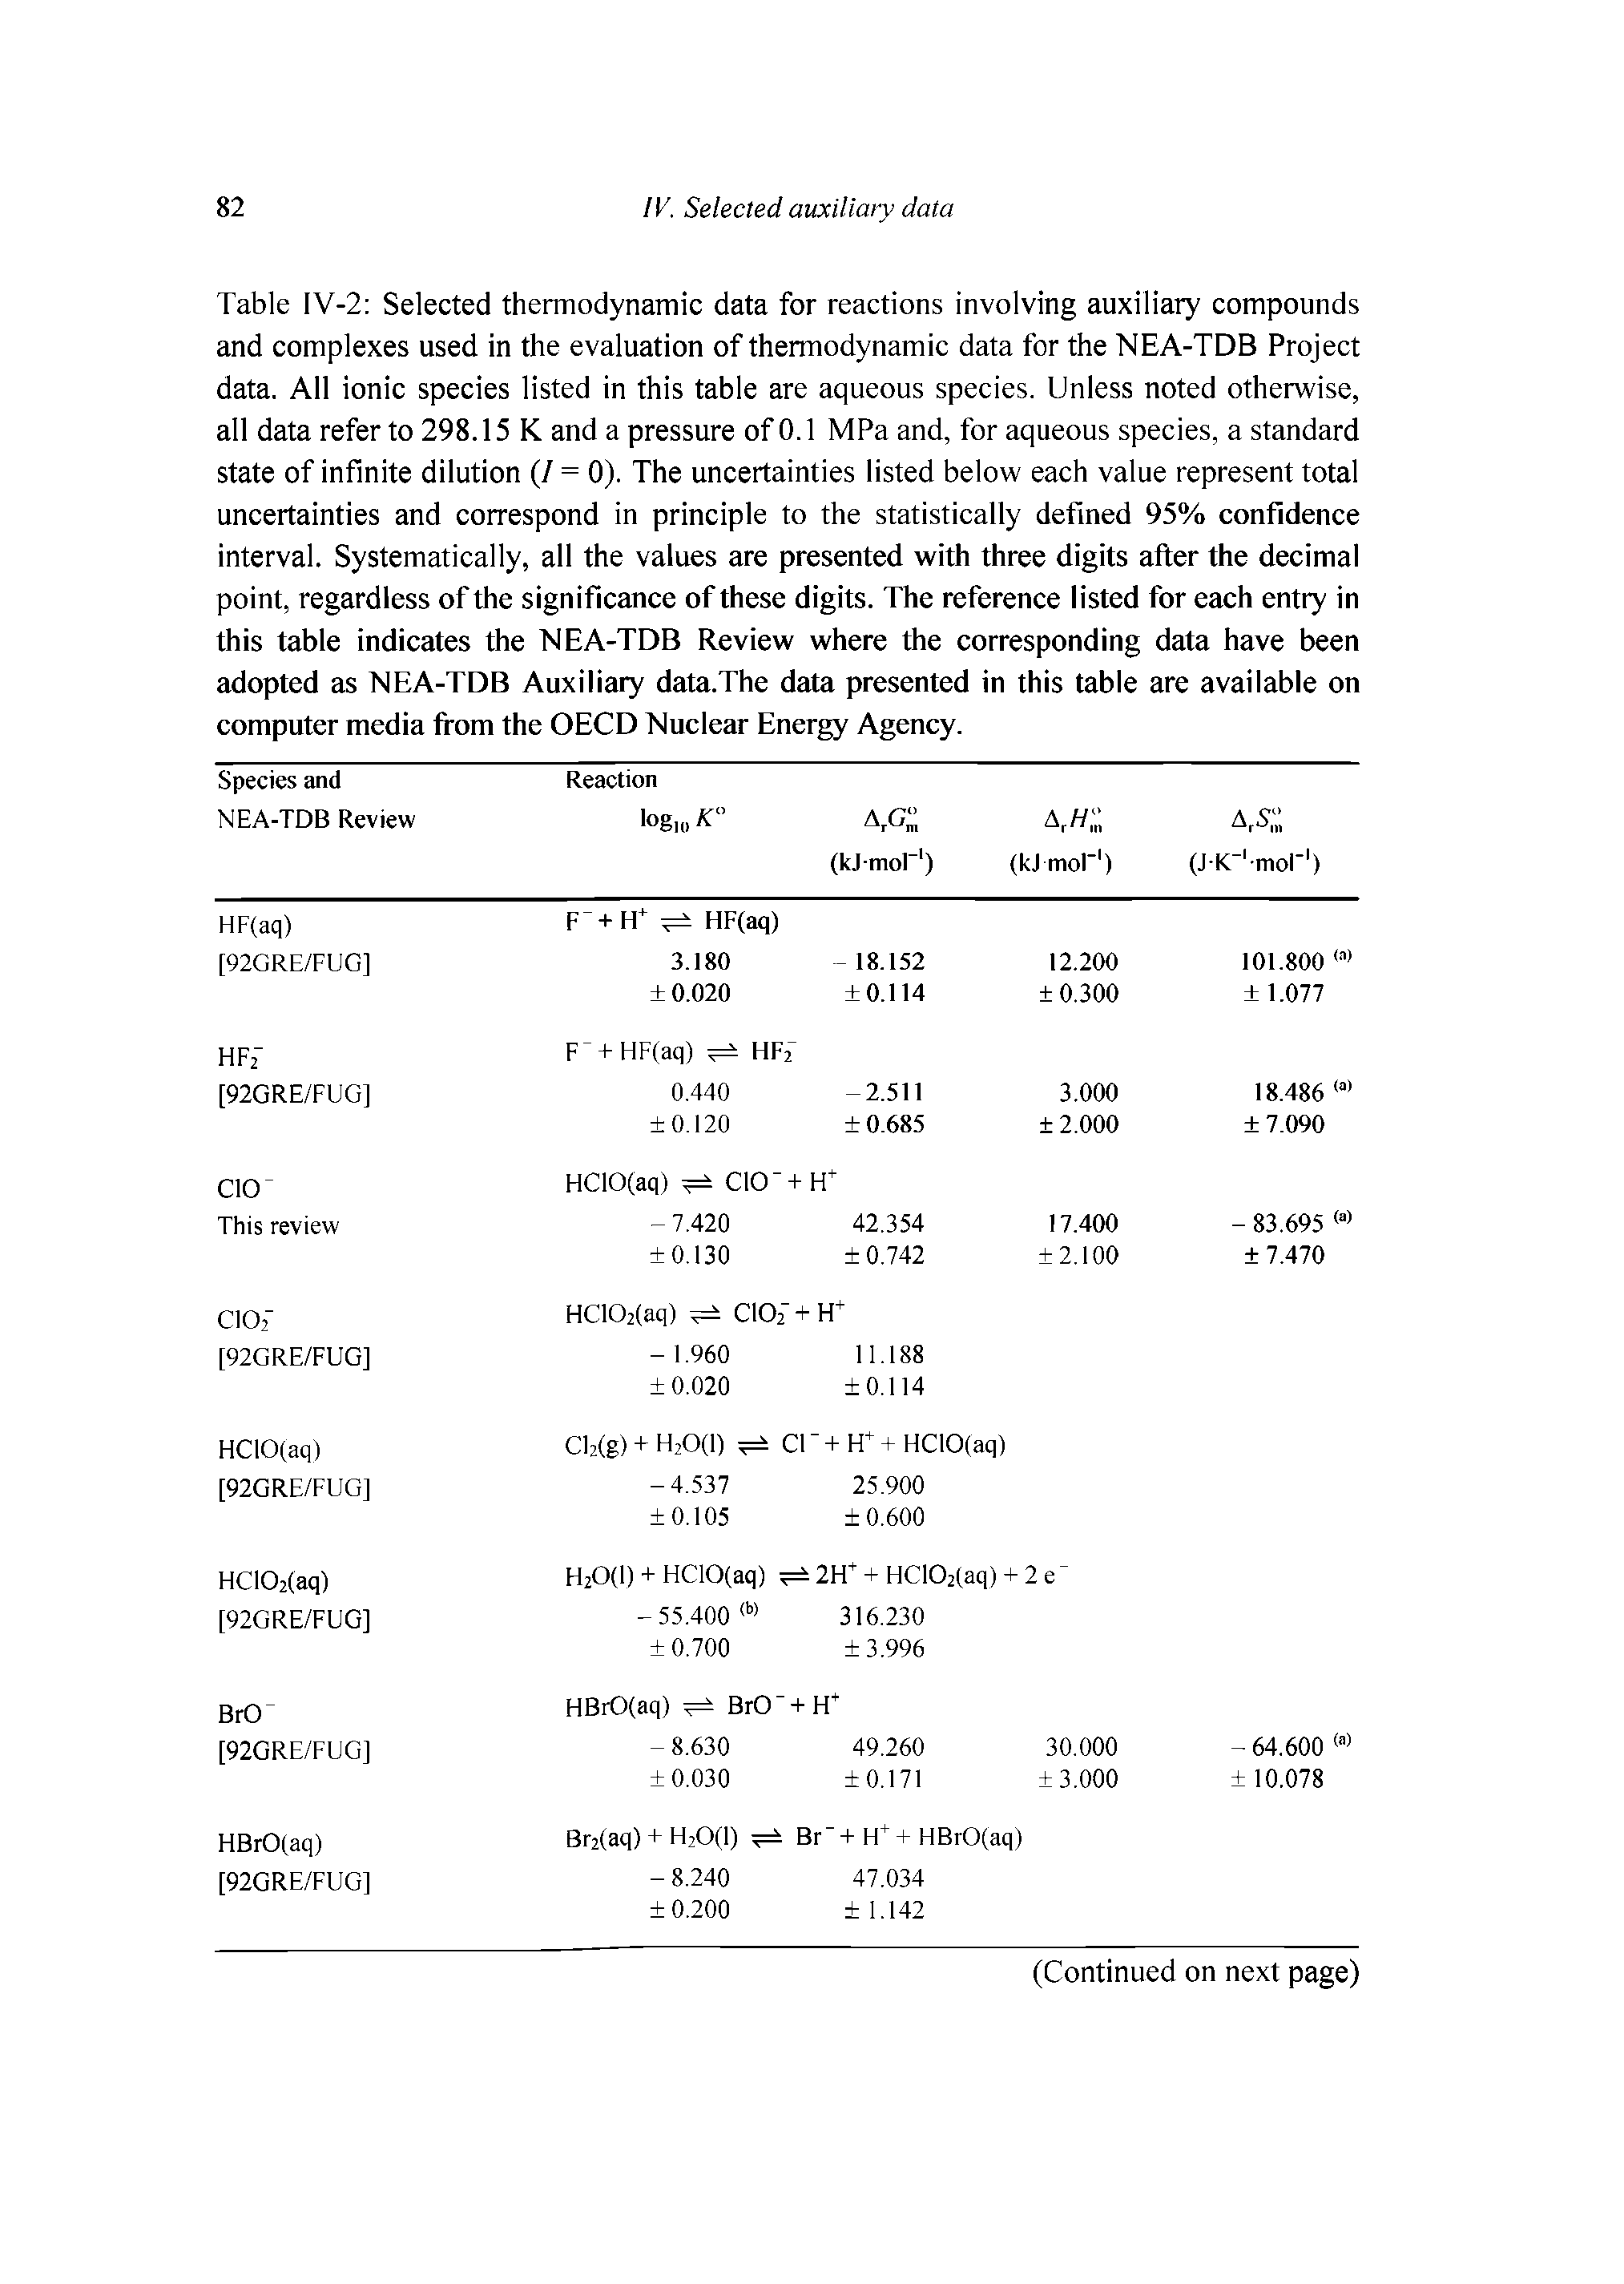 Table IV-2 Selected thermodynamic data for reactions involving auxiliary compounds and complexes used in the evaluation of thermodynamic data for the NEA-TDB Project data. All ionic species listed in this table are aqueous species. Unless noted otherwise, all data refer to 298.15 K and a pressure of 0.1 MPa and, for aqueous species, a standard state of infinite dilution (/ = 0). The uncertainties listed below each value represent total uncertainties and correspond in principle to the statistically defined 95% confidence interval. Systematically, all the values are presented with three digits after the decimal point, regardless of the significance of these digits. The reference listed for each entry in this table indicates the NEA-TDB Review where the corresponding data have been...